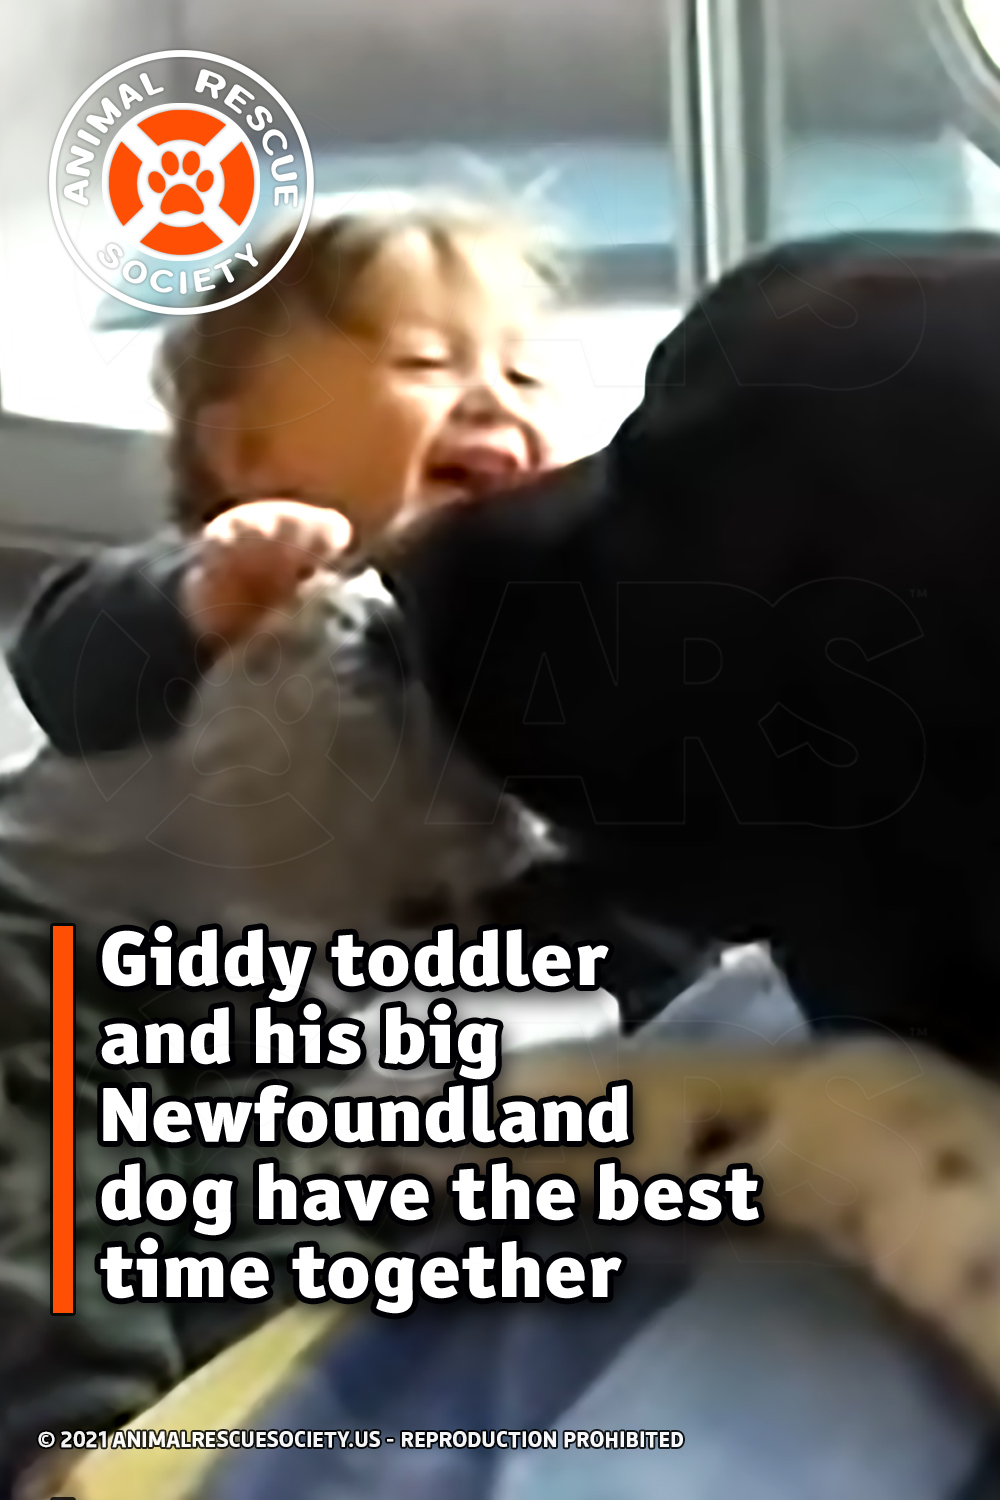 Giddy toddler and his big Newfoundland dog have the best time together